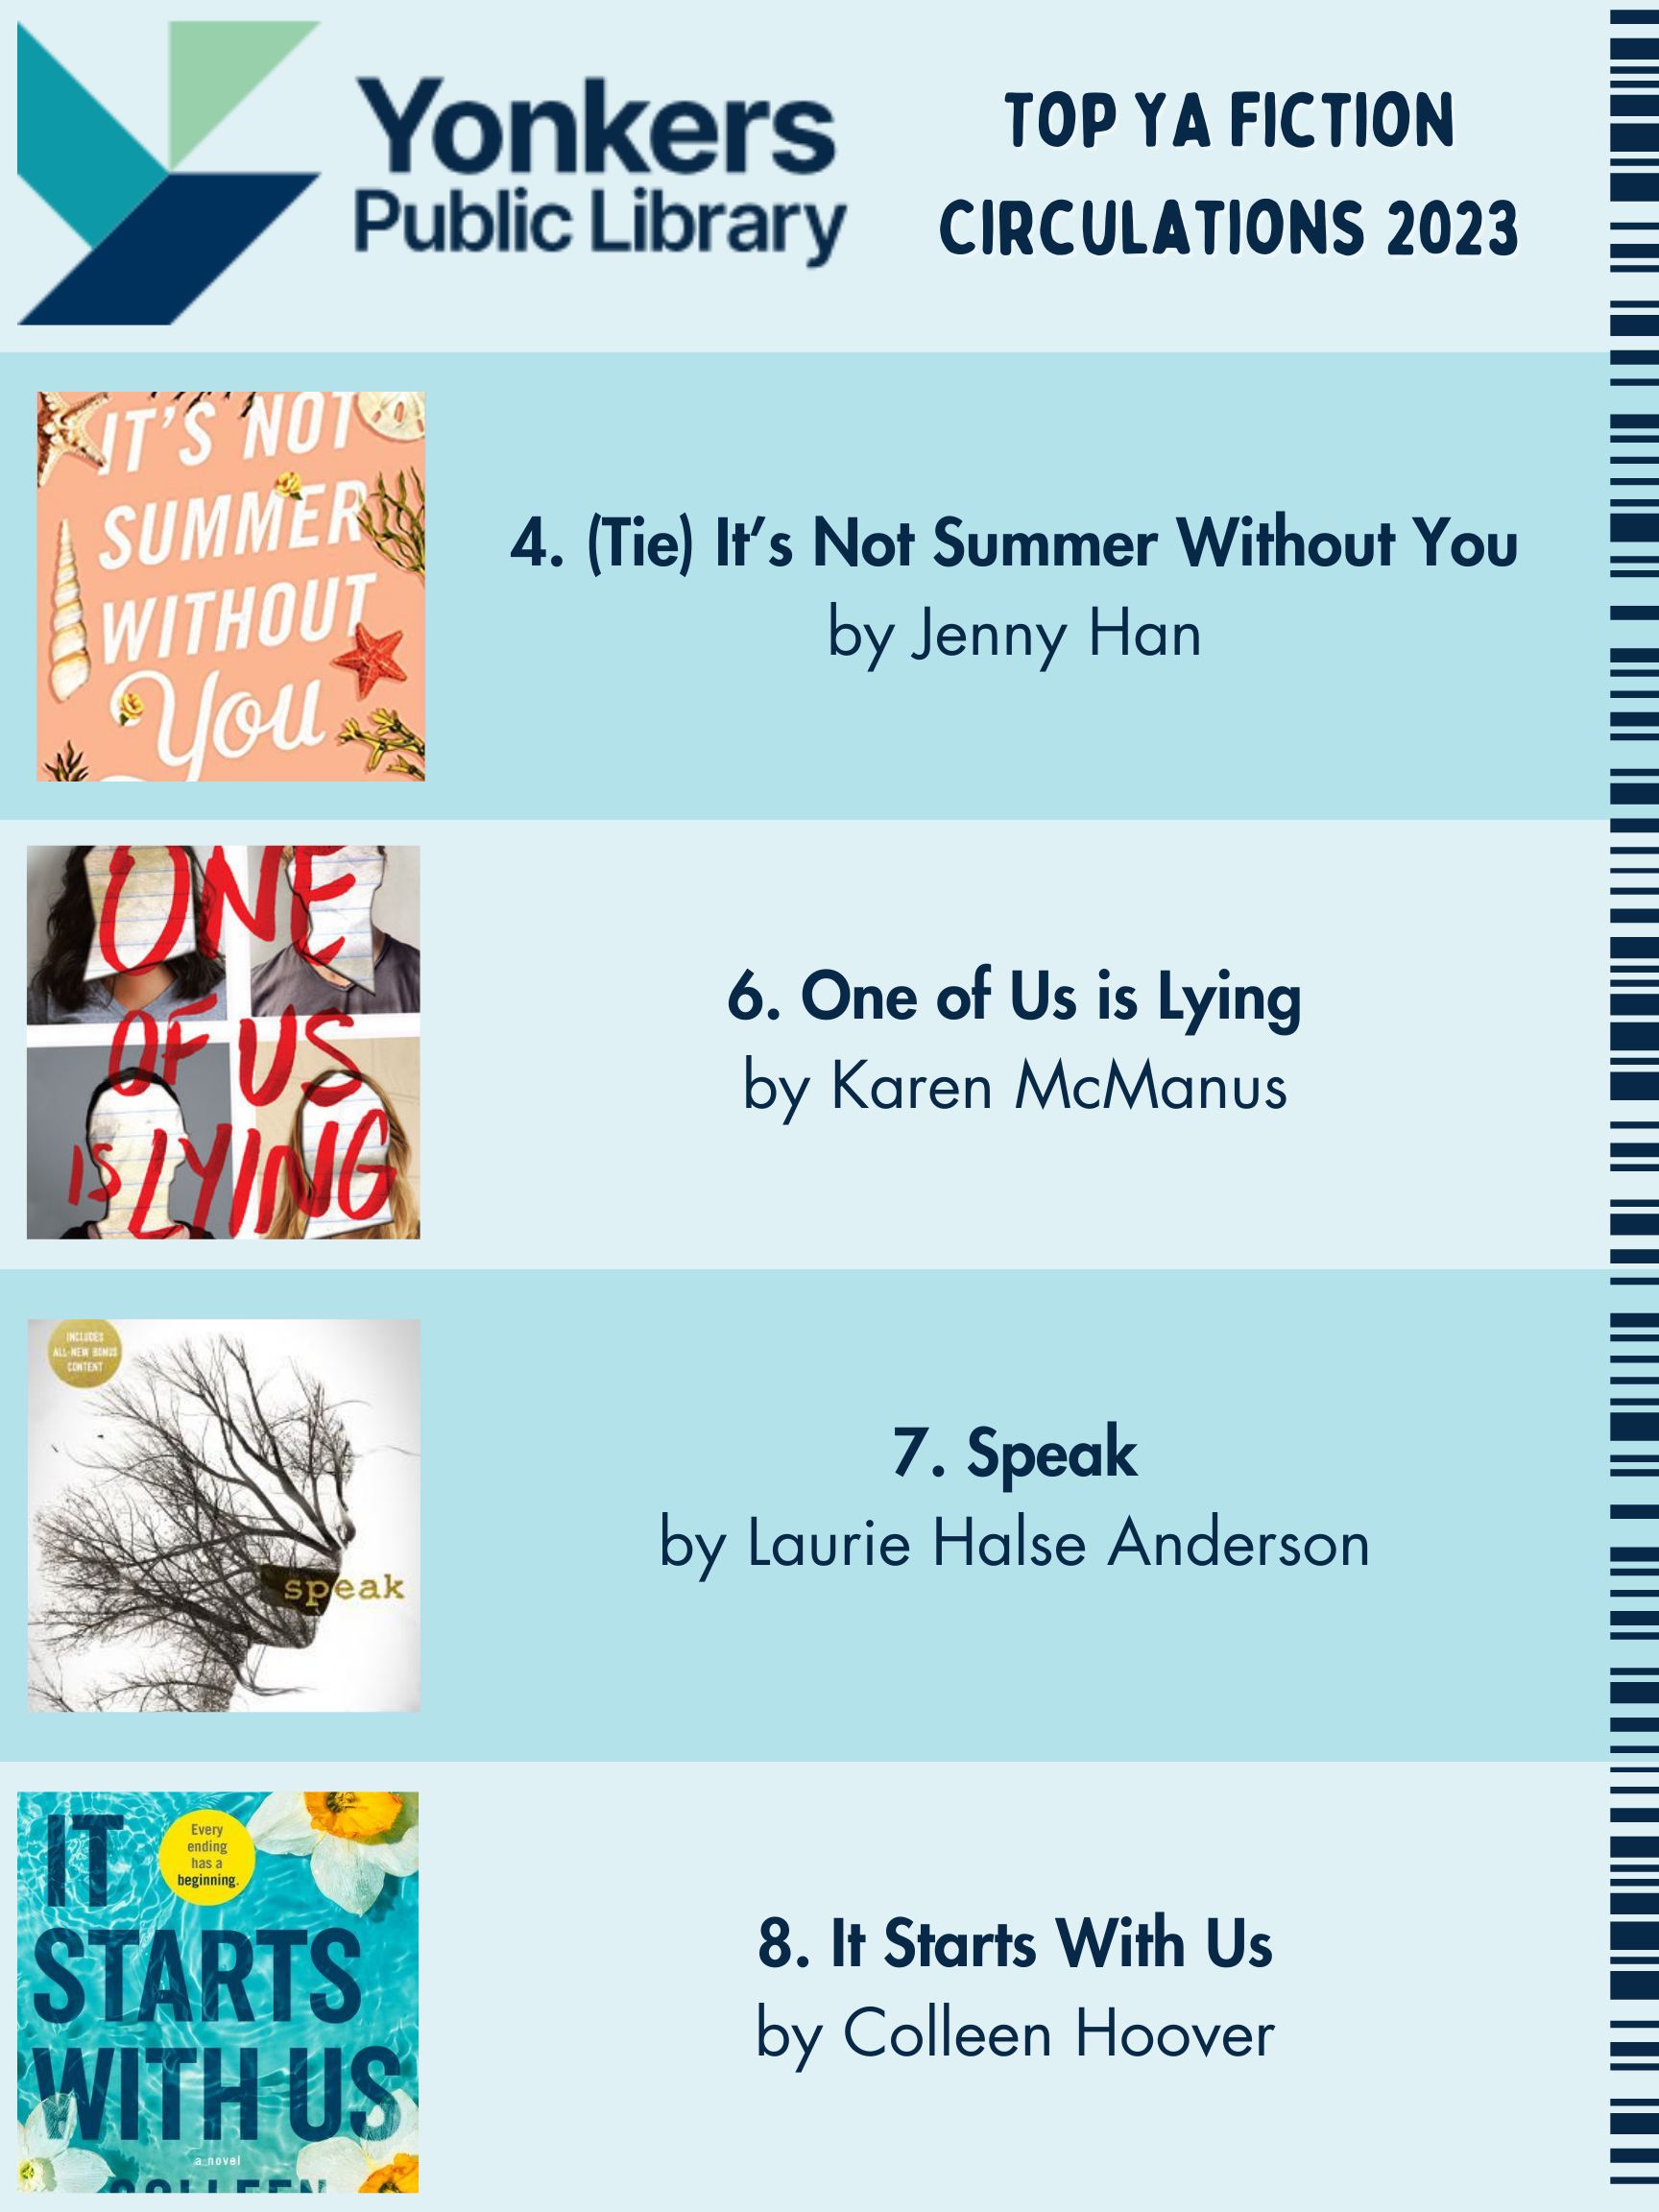 Top YA Fiction Circulations 2023. It's Not Summer Without You, One of Us is Lying, Speak, and It Starts With Us.